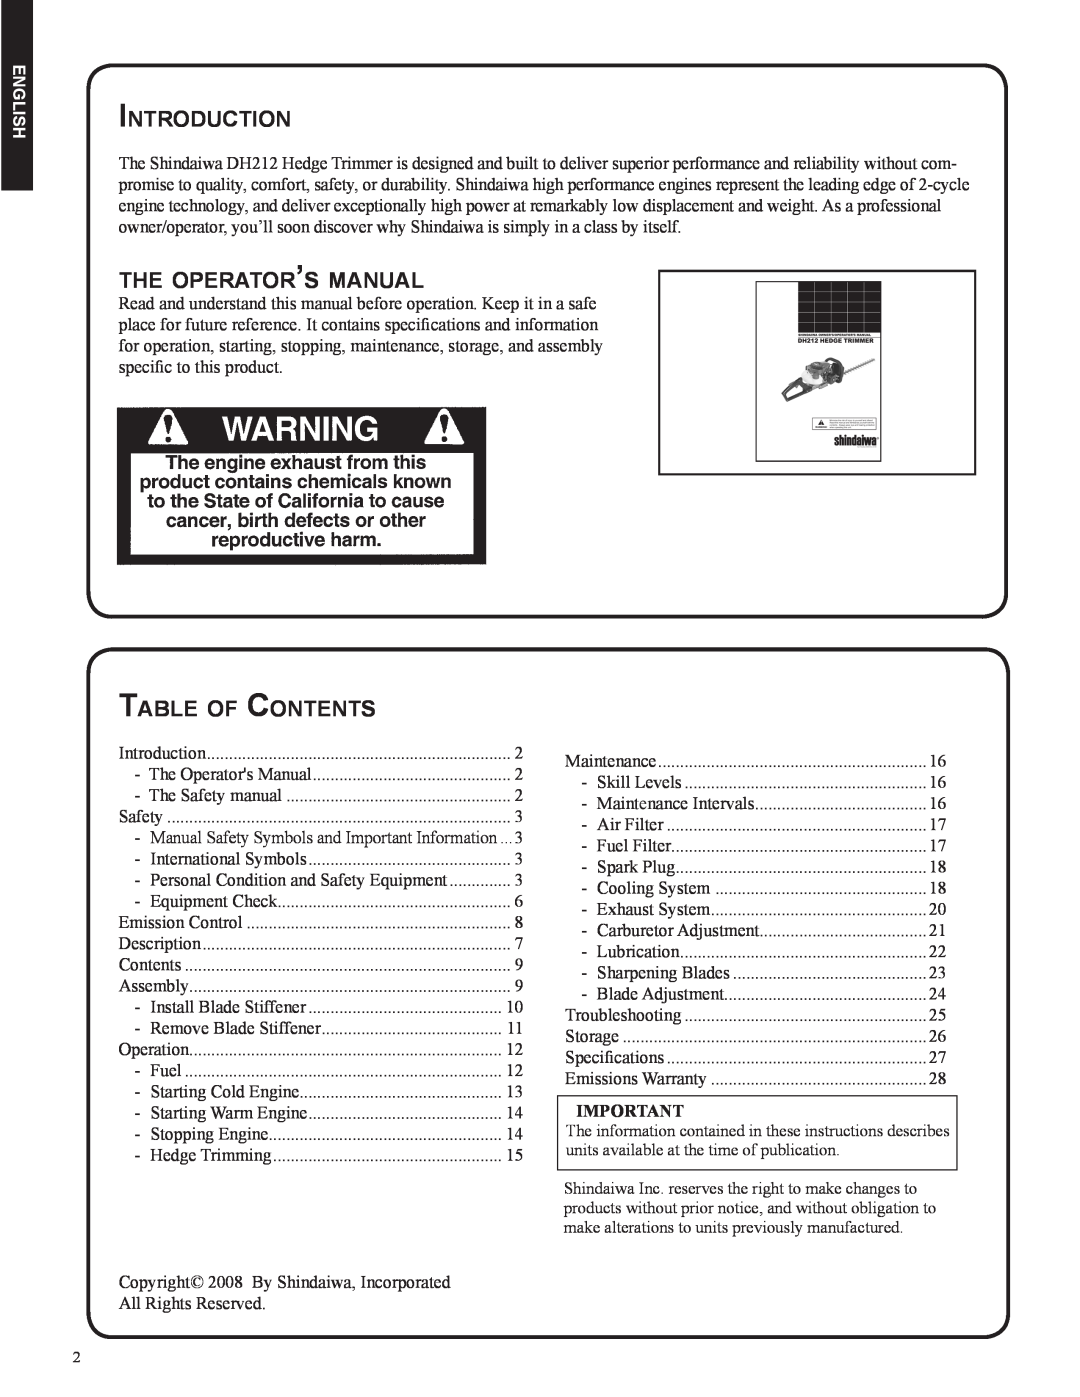 Shindaiwa DH212, 82053 Introduction, the operator’s manual, Table of Contents, English 